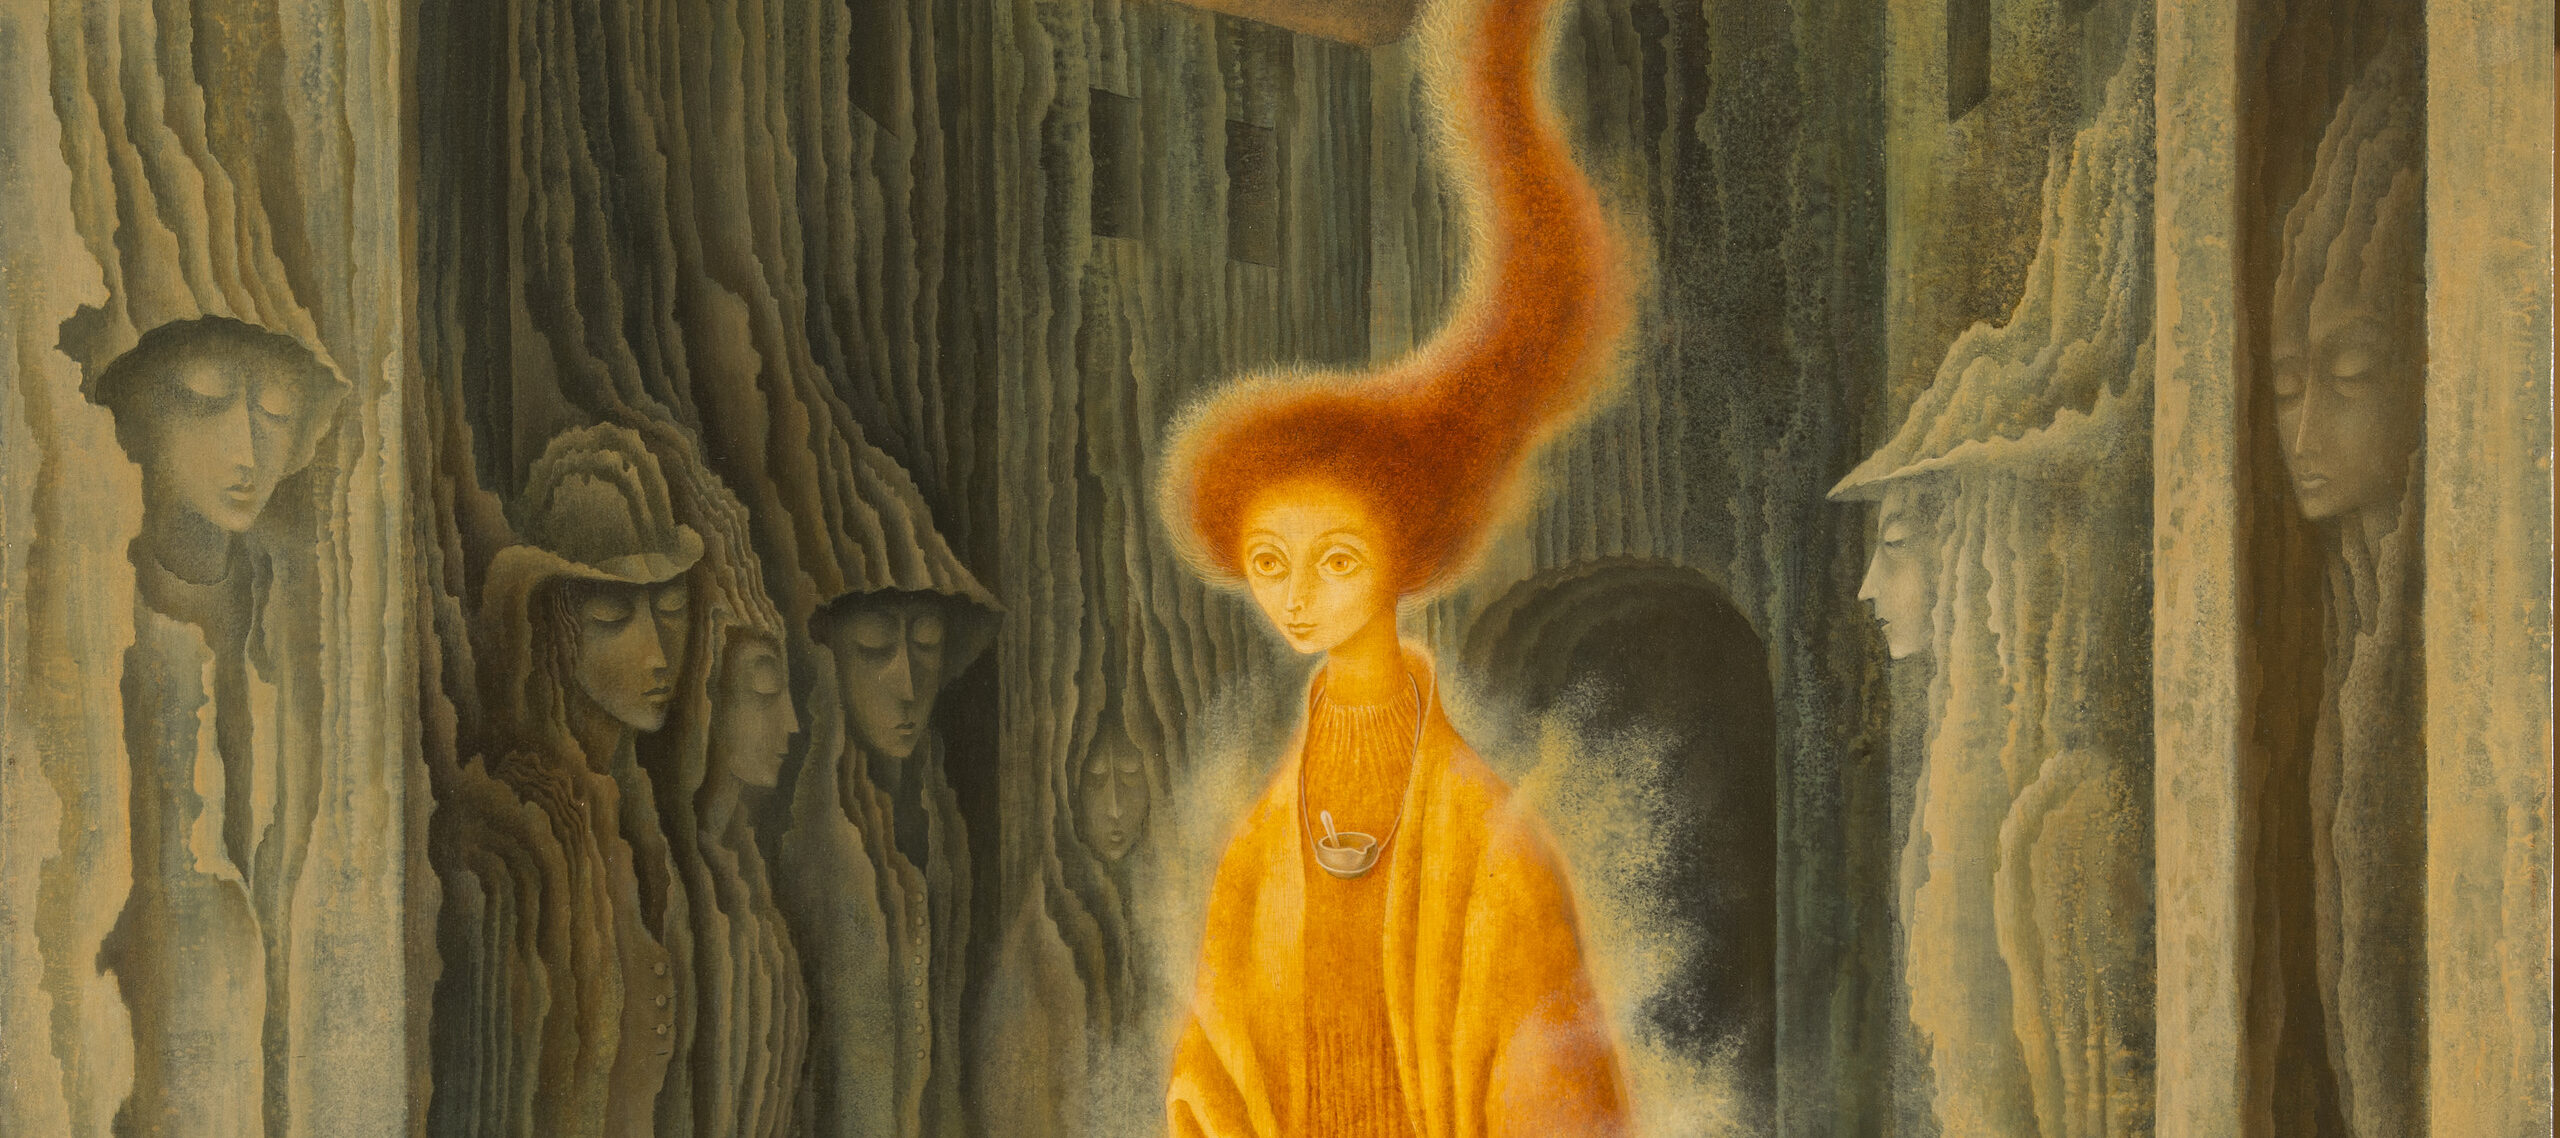 Rendered with precise brushwork, a tall, thin figure strides forward wearing flowing, orange garments emanating a misty golden aura. Her fiery red hair stretches heavenward, encircling a celestial orb. Figures appear encased in the walls of the concave structure surrounding her.